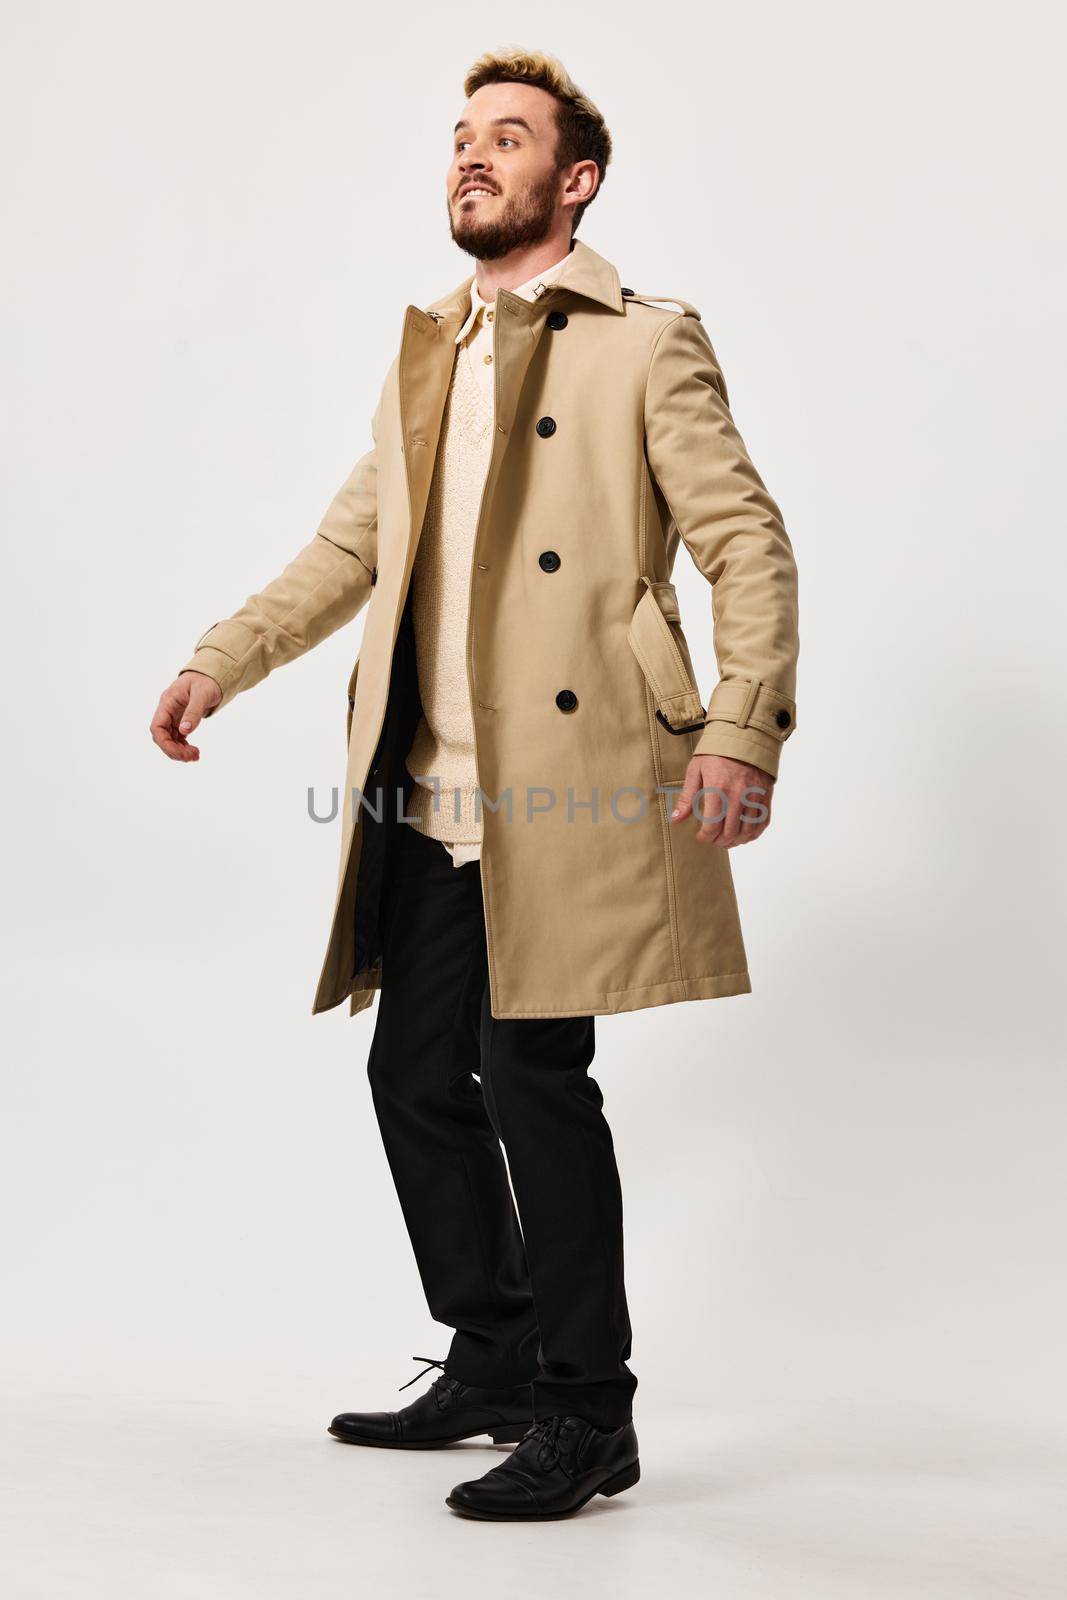 a man in a beige coat and trousers on a Light background boots Copy Space. High quality photo